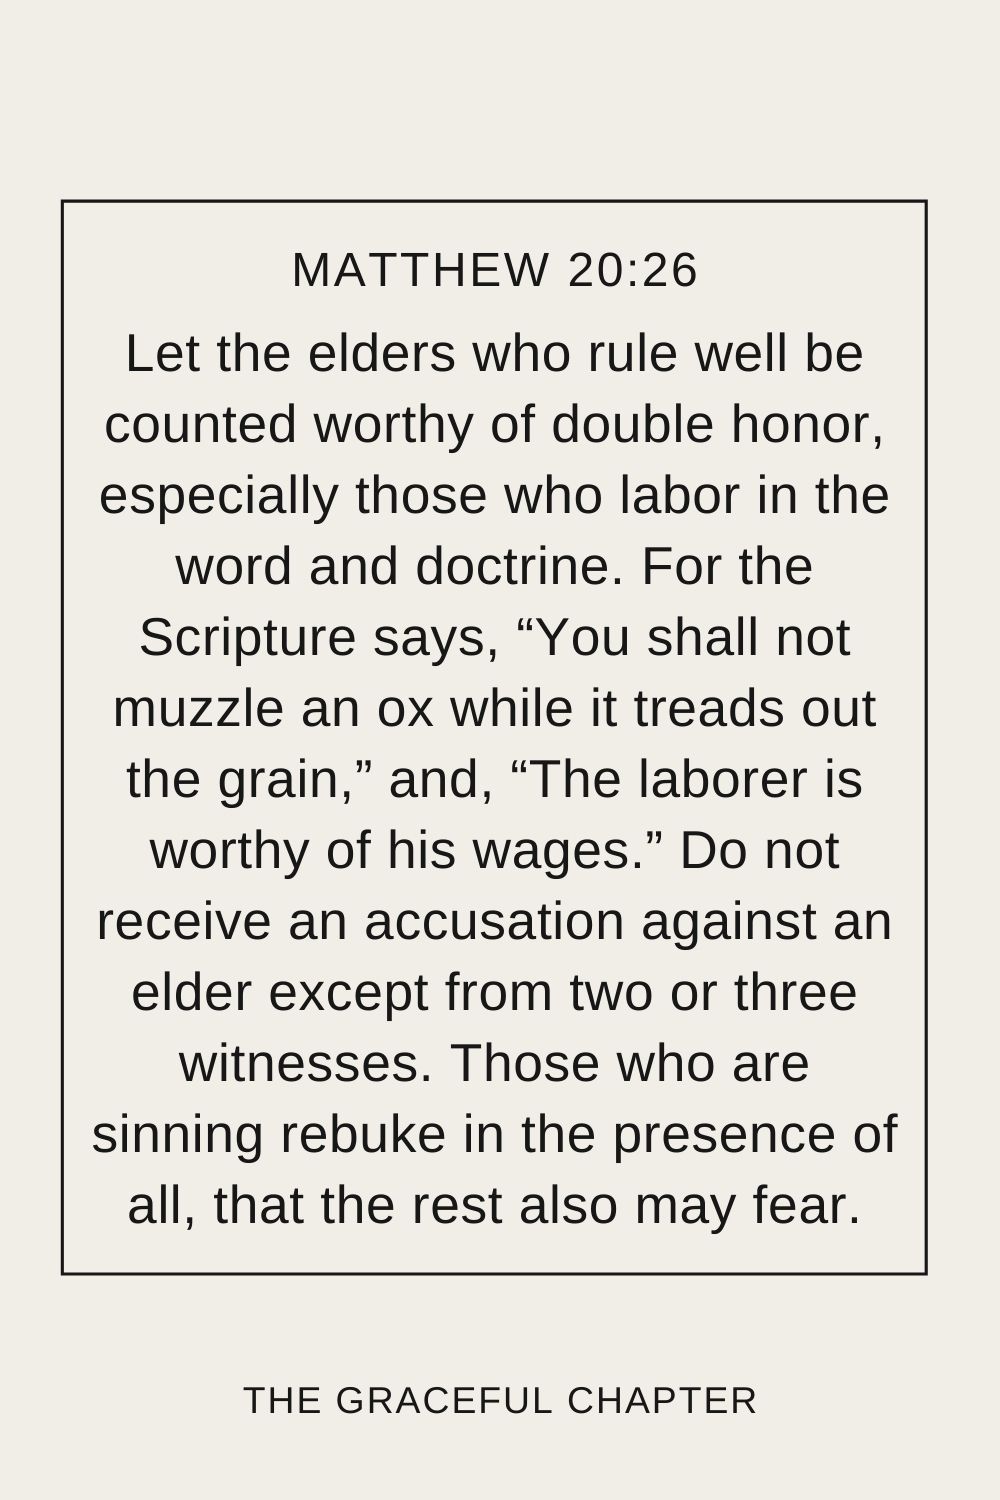 Let the elders who rule well be counted worthy of double honor, especially those who labor in the word and doctrine. For the Scripture says, “You shall not muzzle an ox while it treads out the grain,” and, “The laborer is worthy of his wages.” Do not receive an accusation against an elder except from two or three witnesses. Those who are sinning rebuke in the presence of all, that the rest also may fear. 1 Timothy 5:17-20